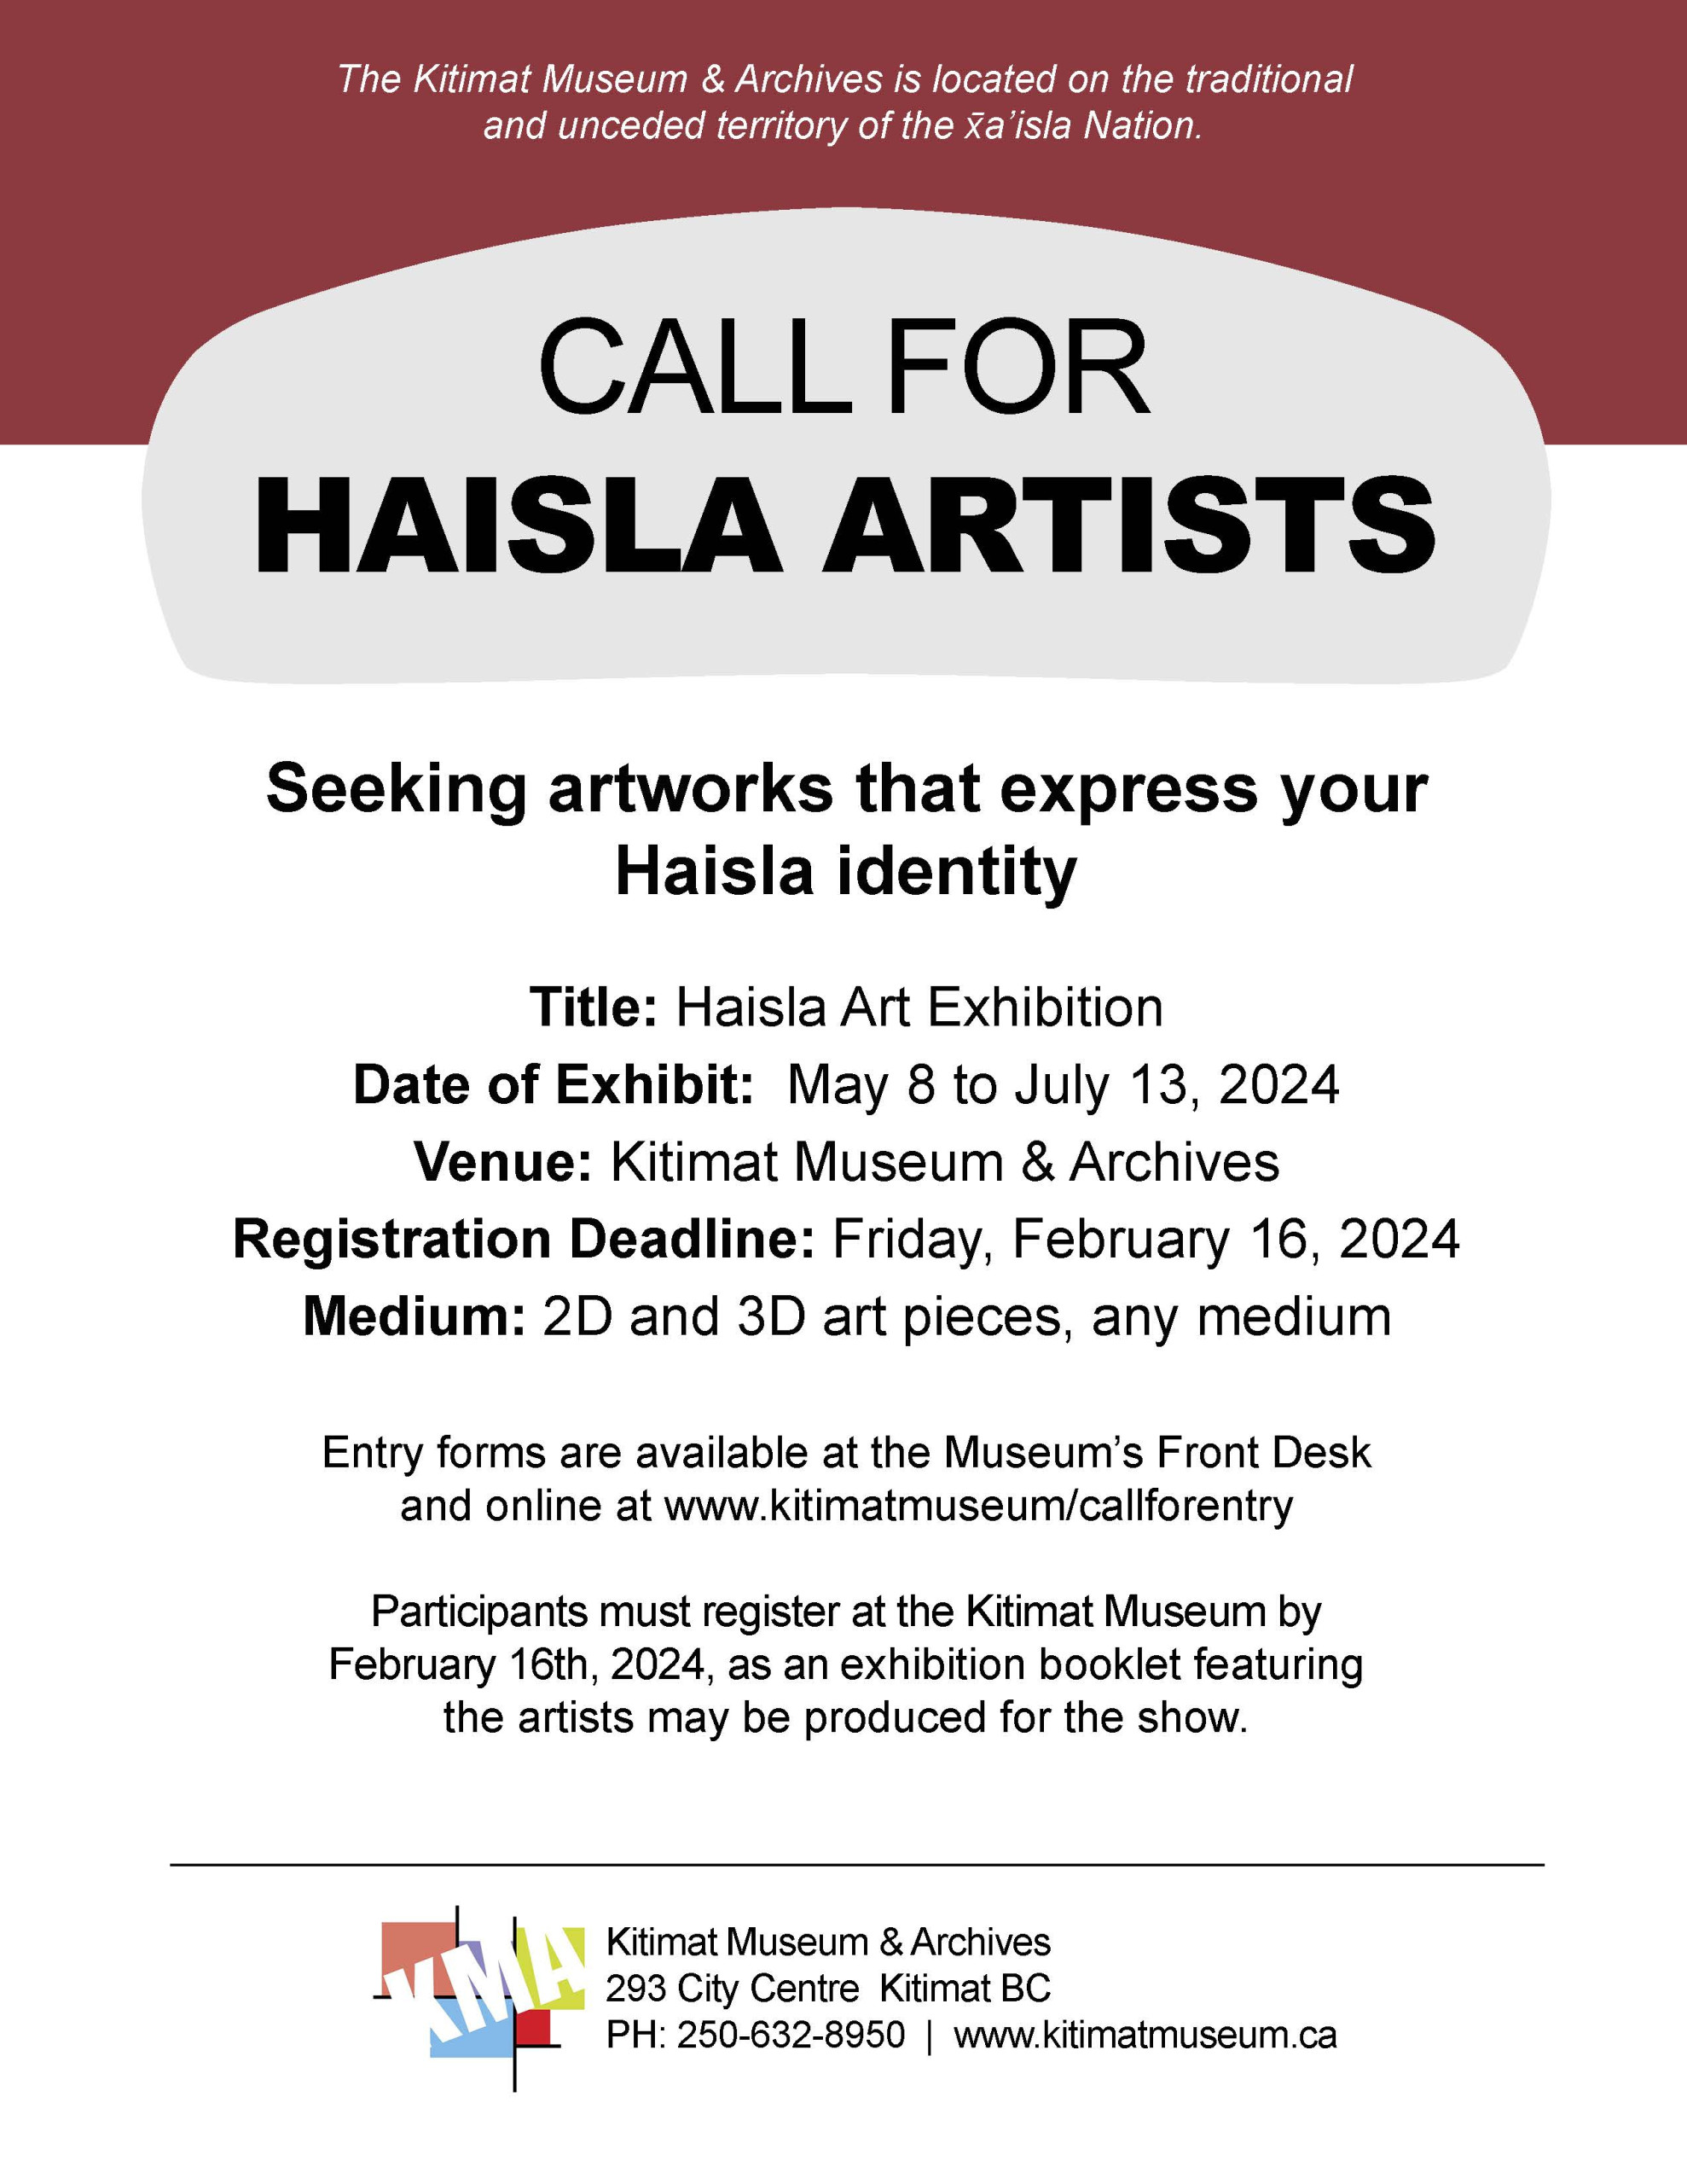 A full page flyer on white paper. The top quarter of the page is a deep read and sits under a grey ovoid shape with black text that reads Call for Haisla Artists. The other three quarters of the page is text describing dates of the Haisla exhibition.